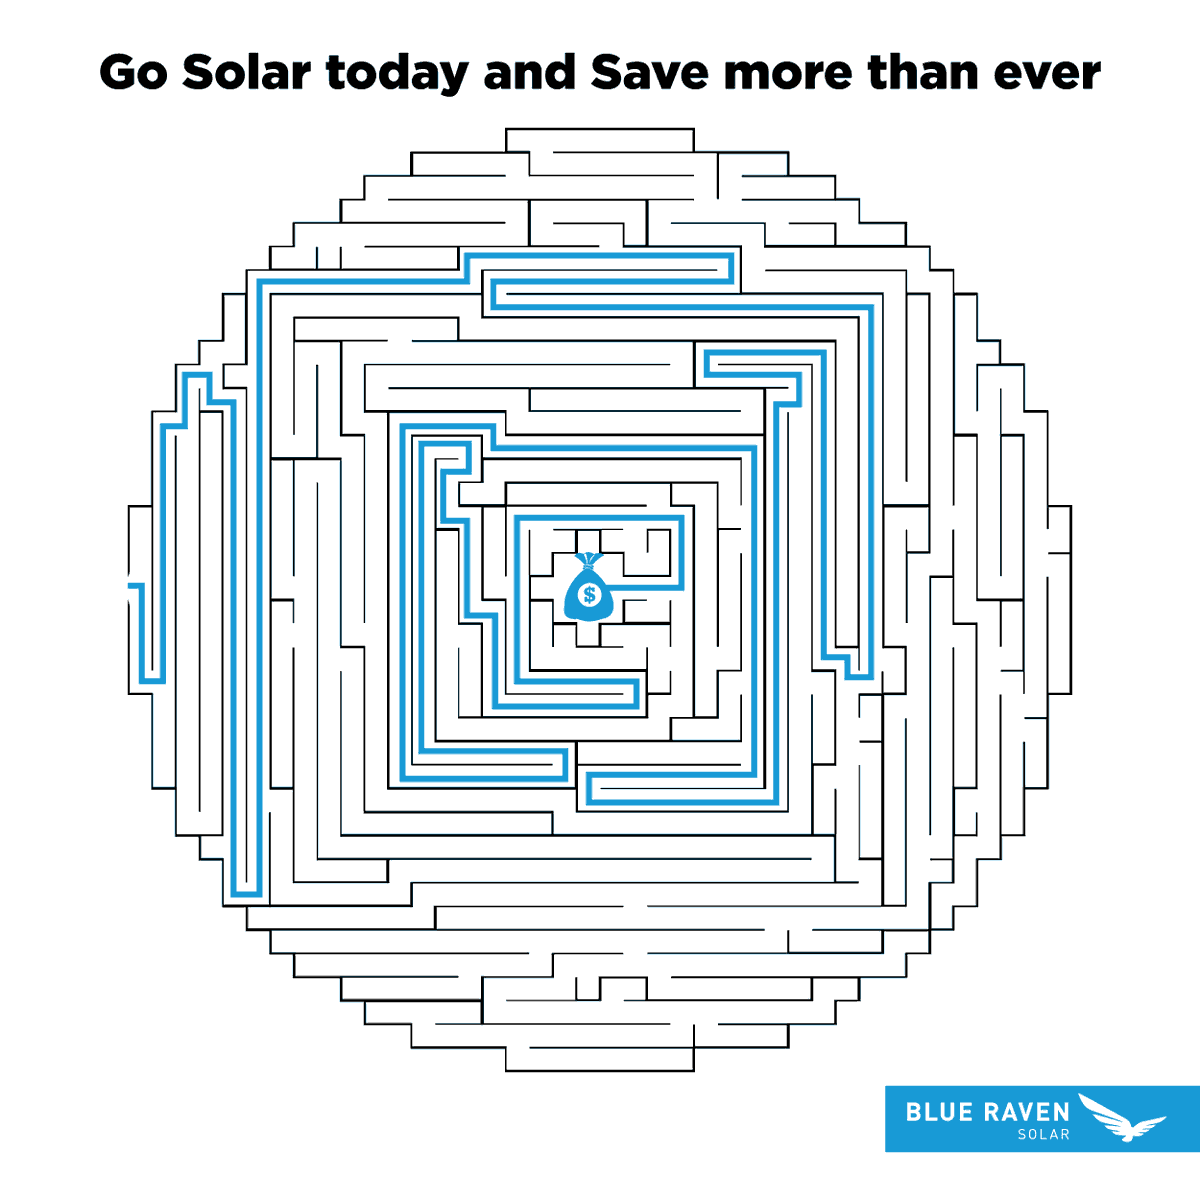 Feeling lost in a maze of high energy bills? We get it! ⚡️ Partner with Blue Raven Solar and we will guide you to a brighter future. Our solar solutions create a clear path to savings, so you can stop getting lost. 🕶️ #SolarSavings #EnergyBill #GoSolar